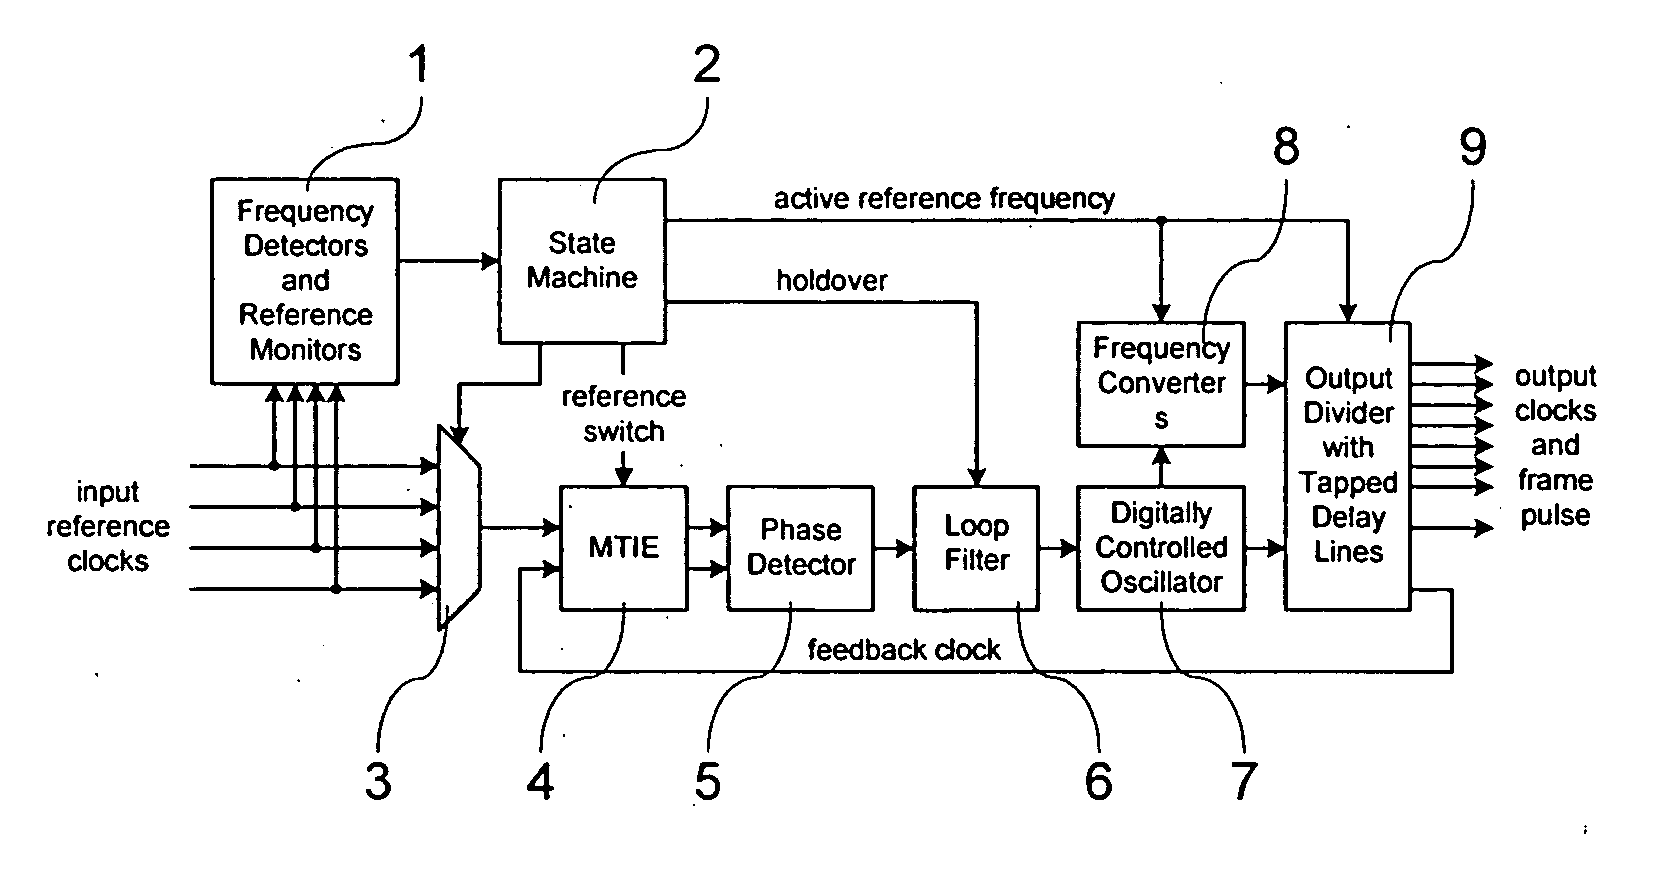 Digital phase locked loop with selectable normal or fast-locking capability